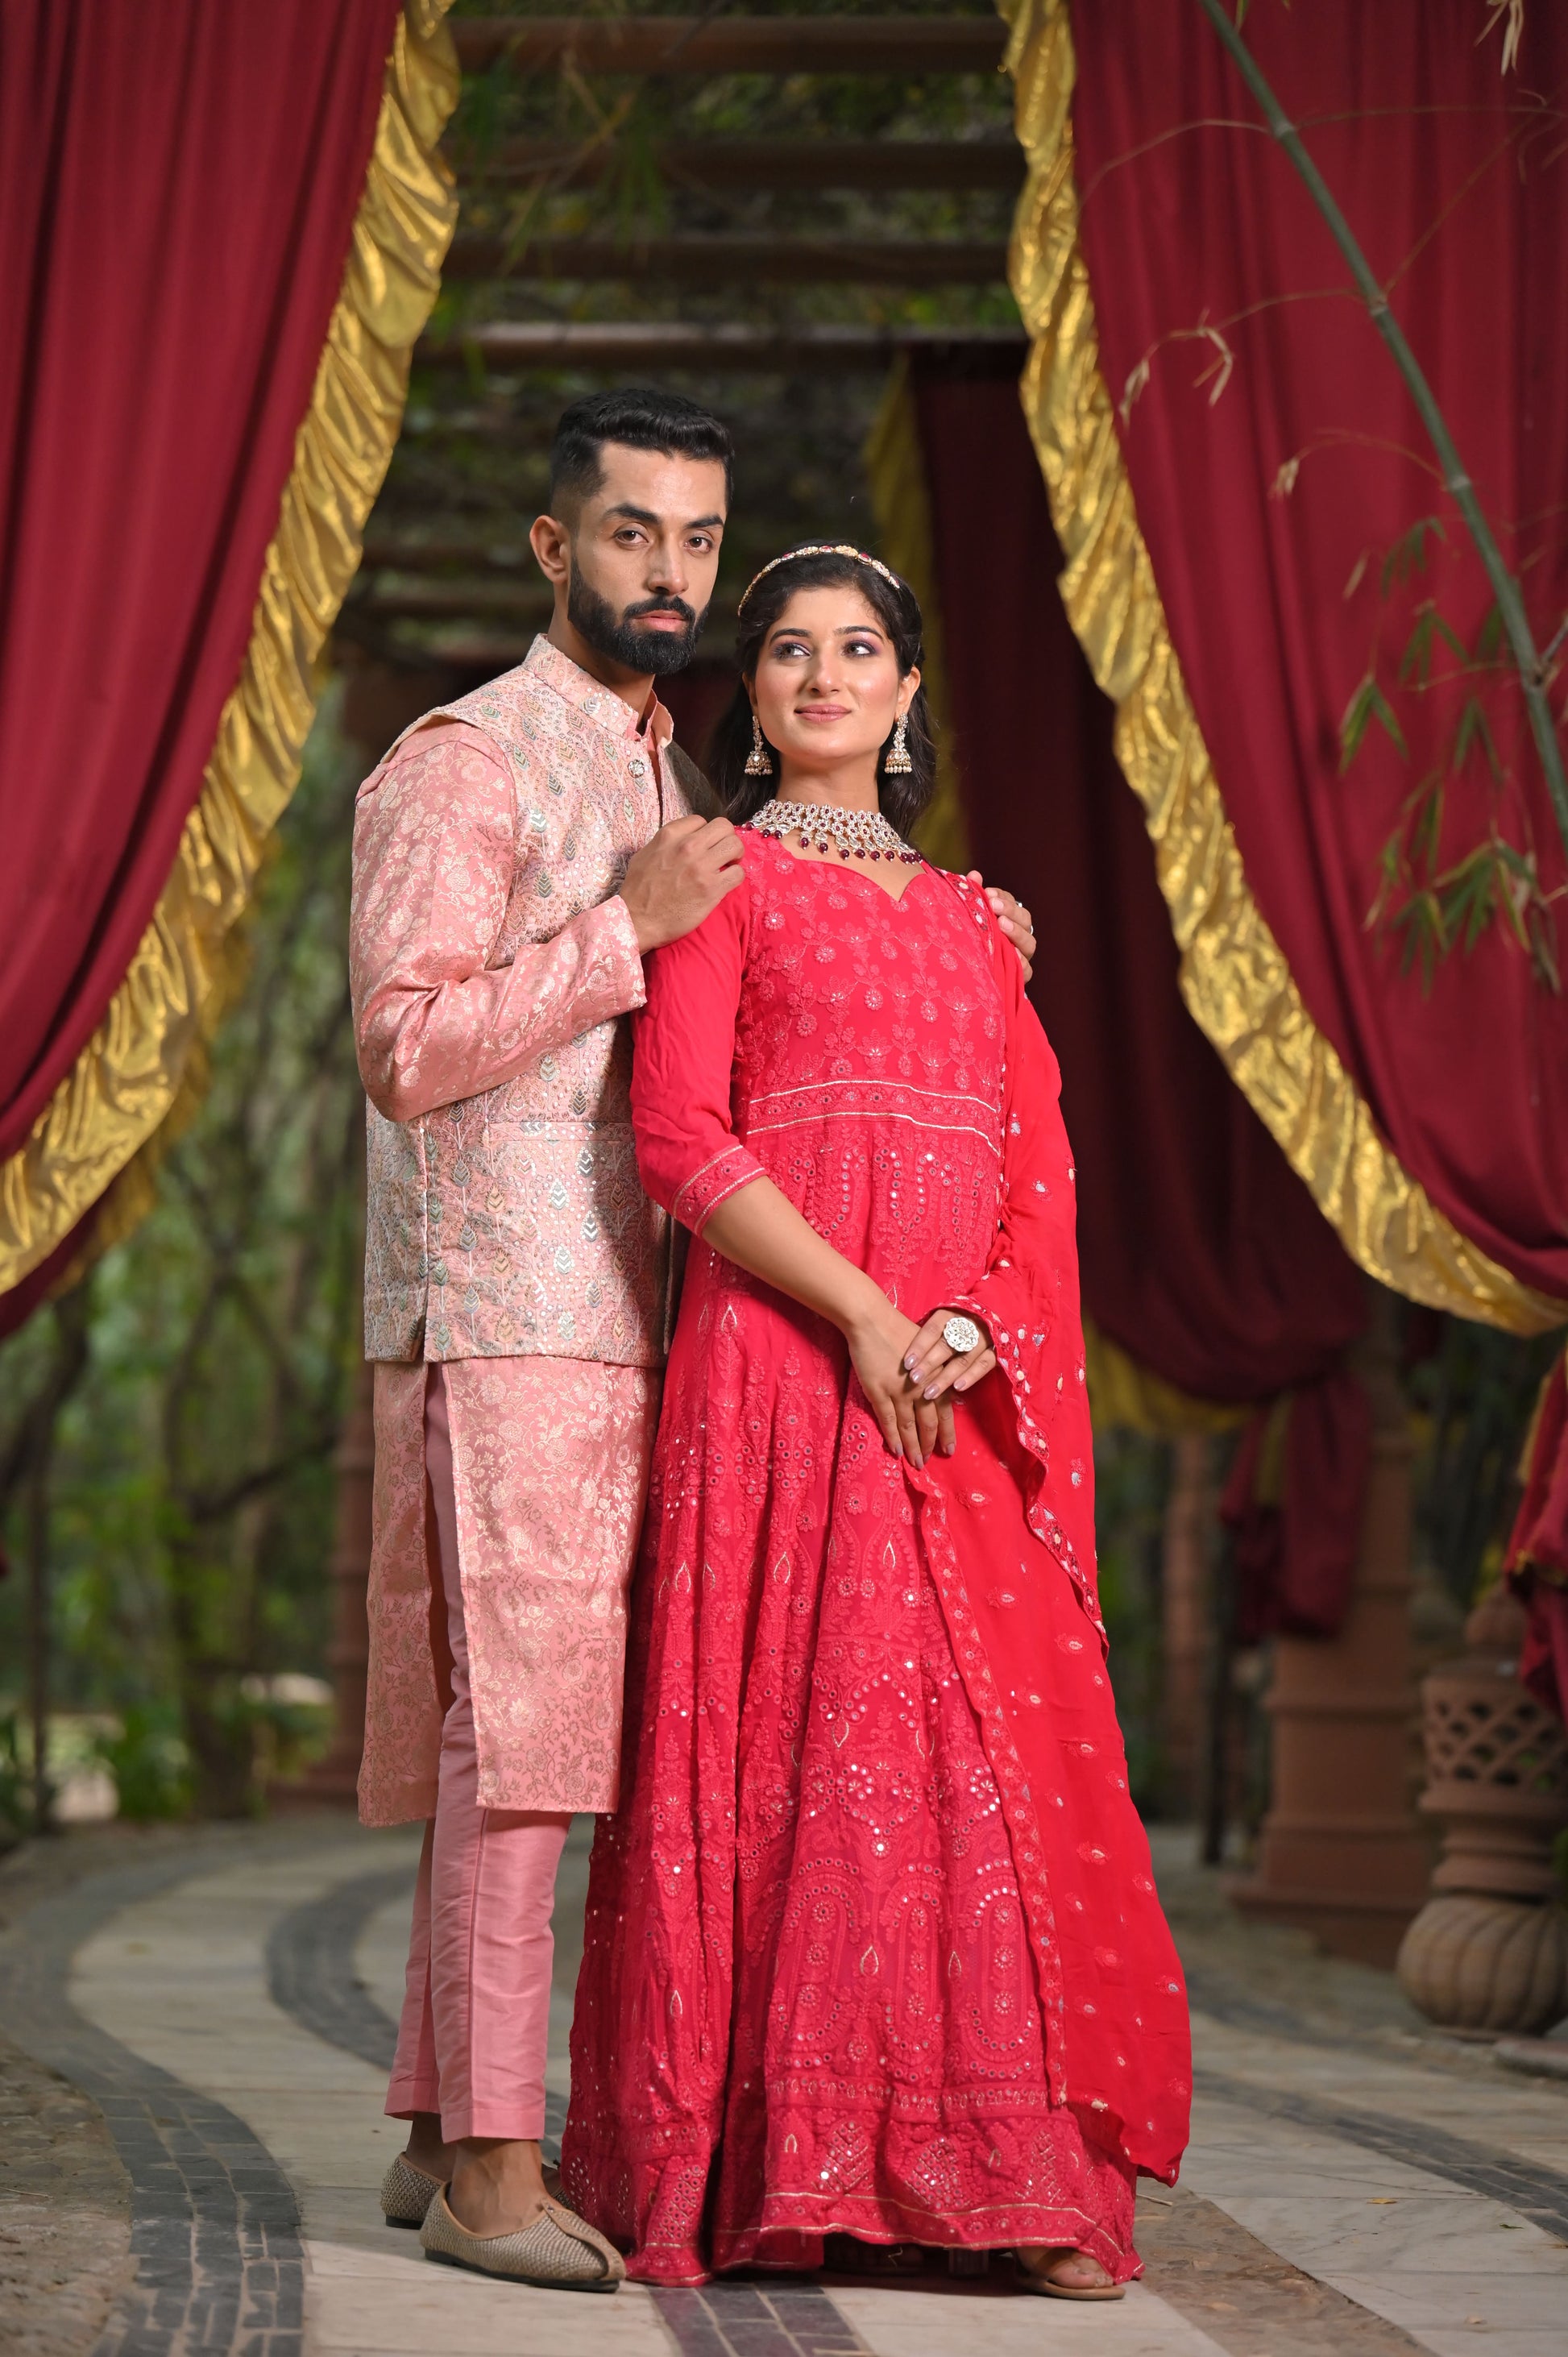 Buy Couple Traditional Dress & Anniversary Dress For Couples - Apella